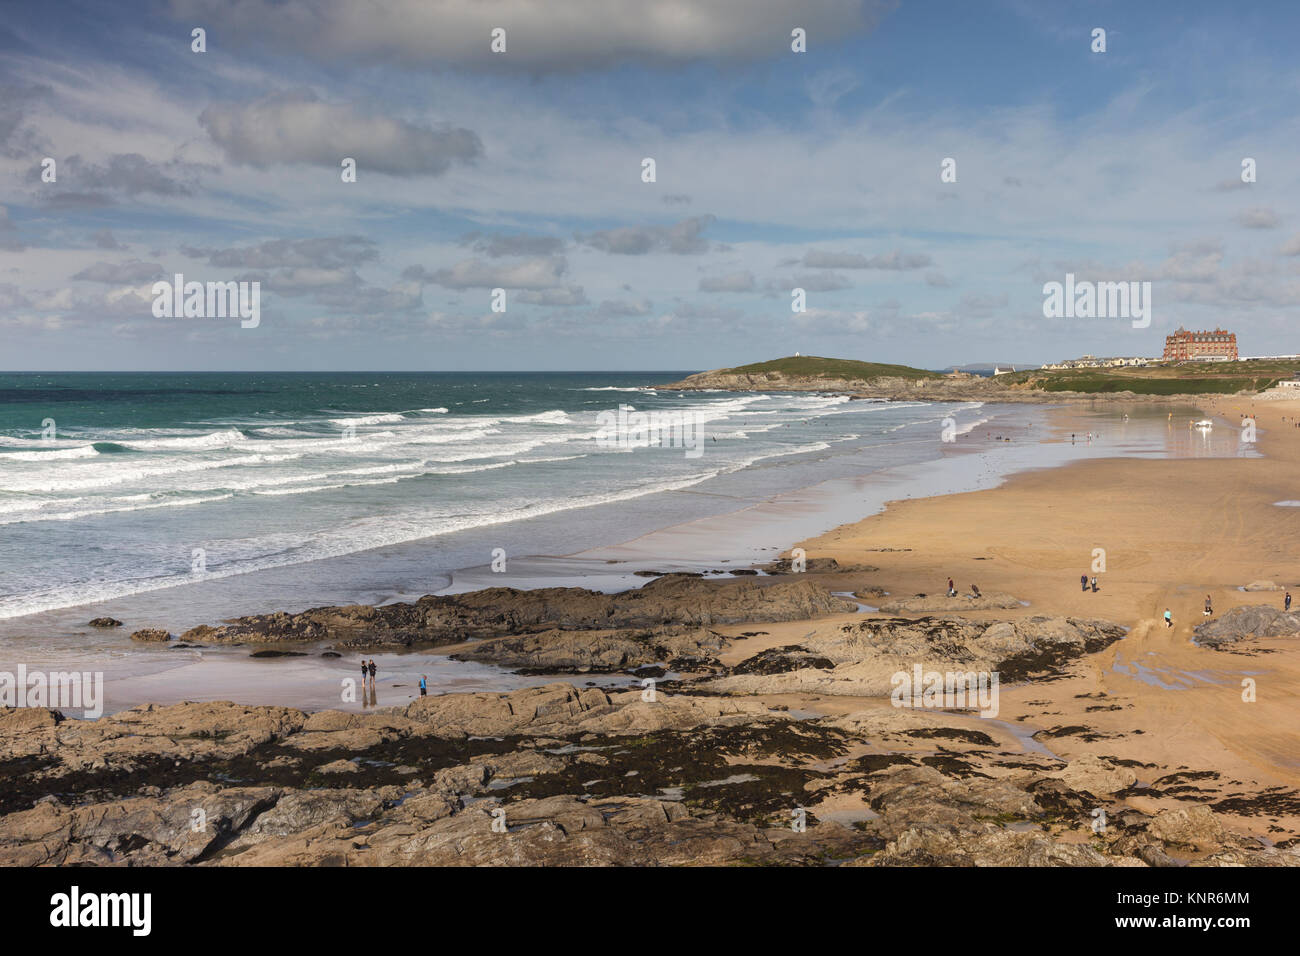 View across Fistral Beach in Newquay in Cornwall towards the Headland Hotel. Waves are breaking on the beach and surfers are in the water. Stock Photo